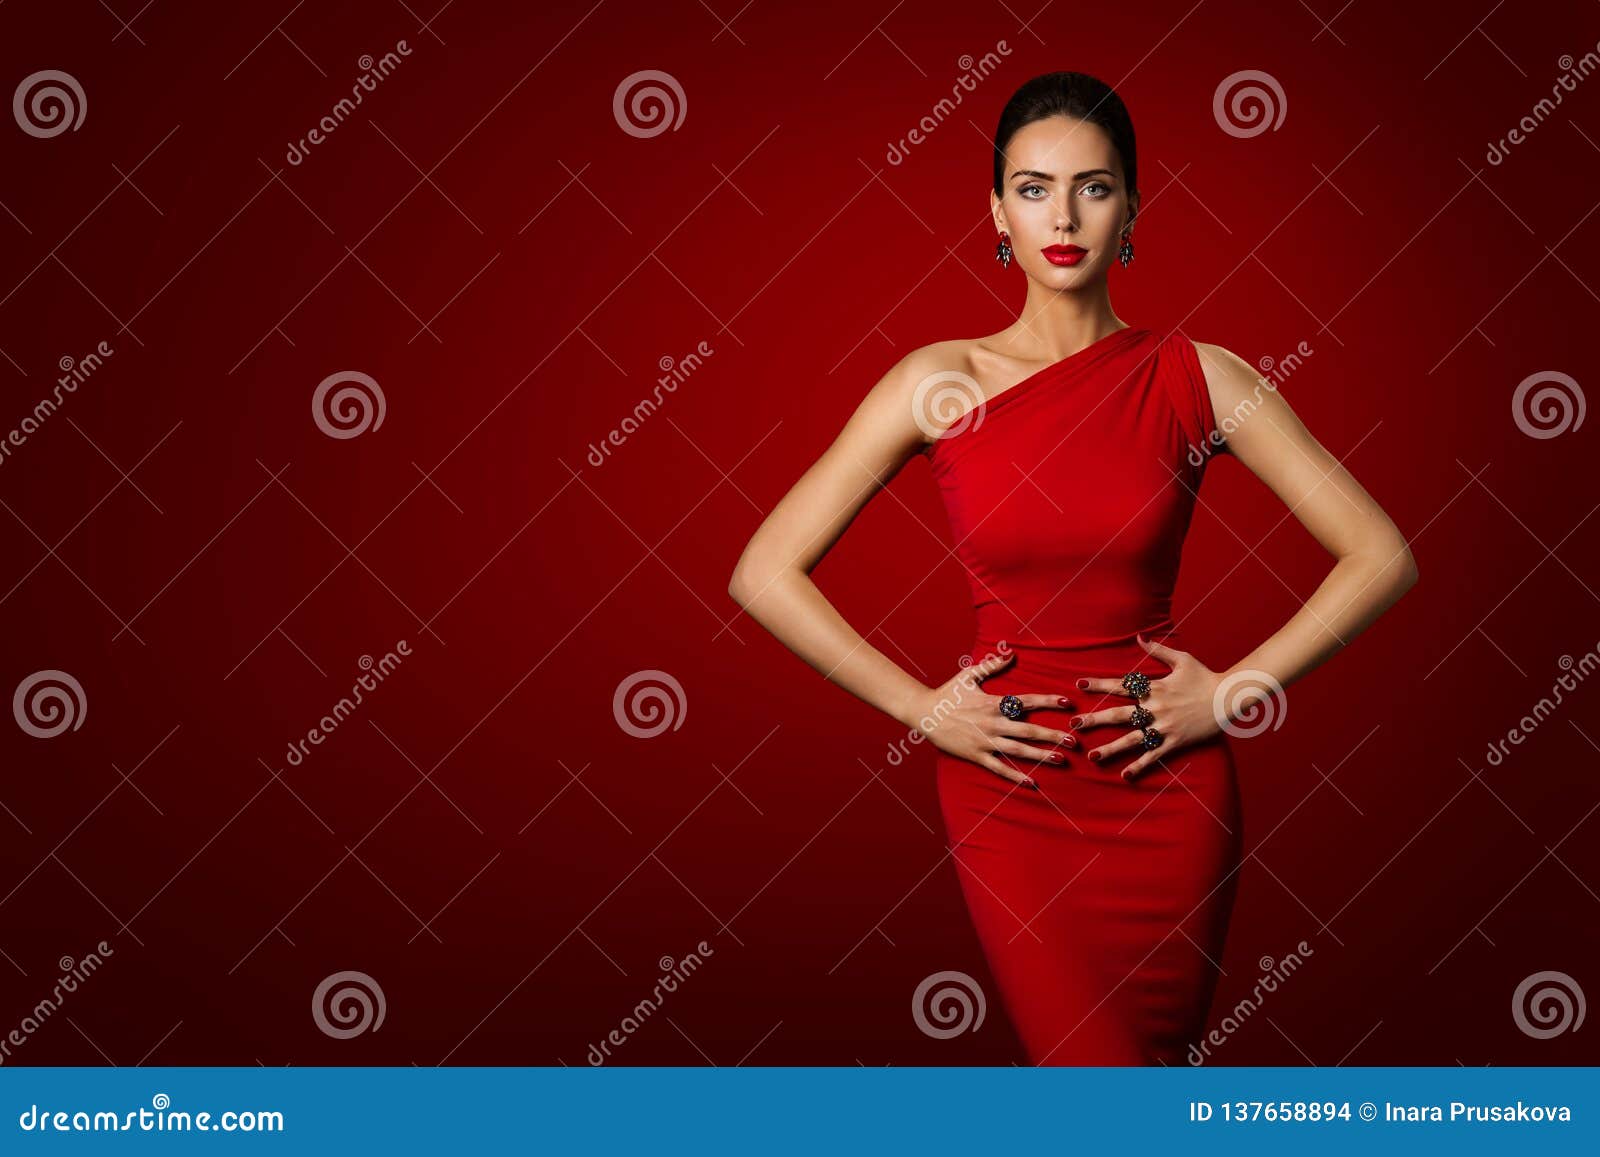 woman red dress, fashion model elegant gown, young girl beauty